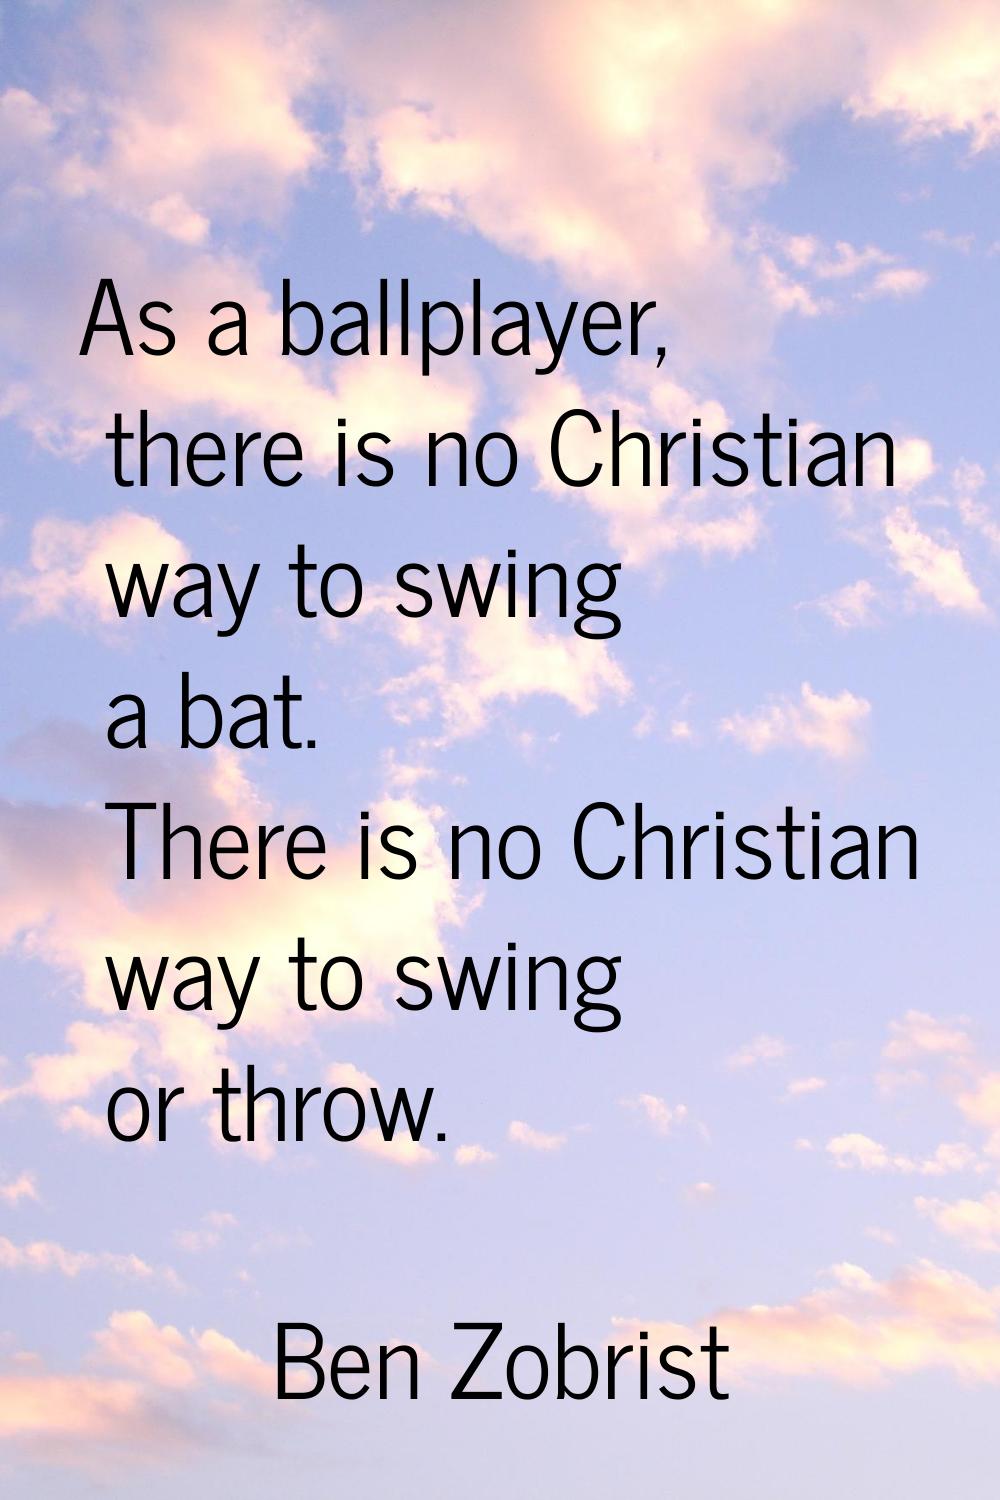 As a ballplayer, there is no Christian way to swing a bat. There is no Christian way to swing or th